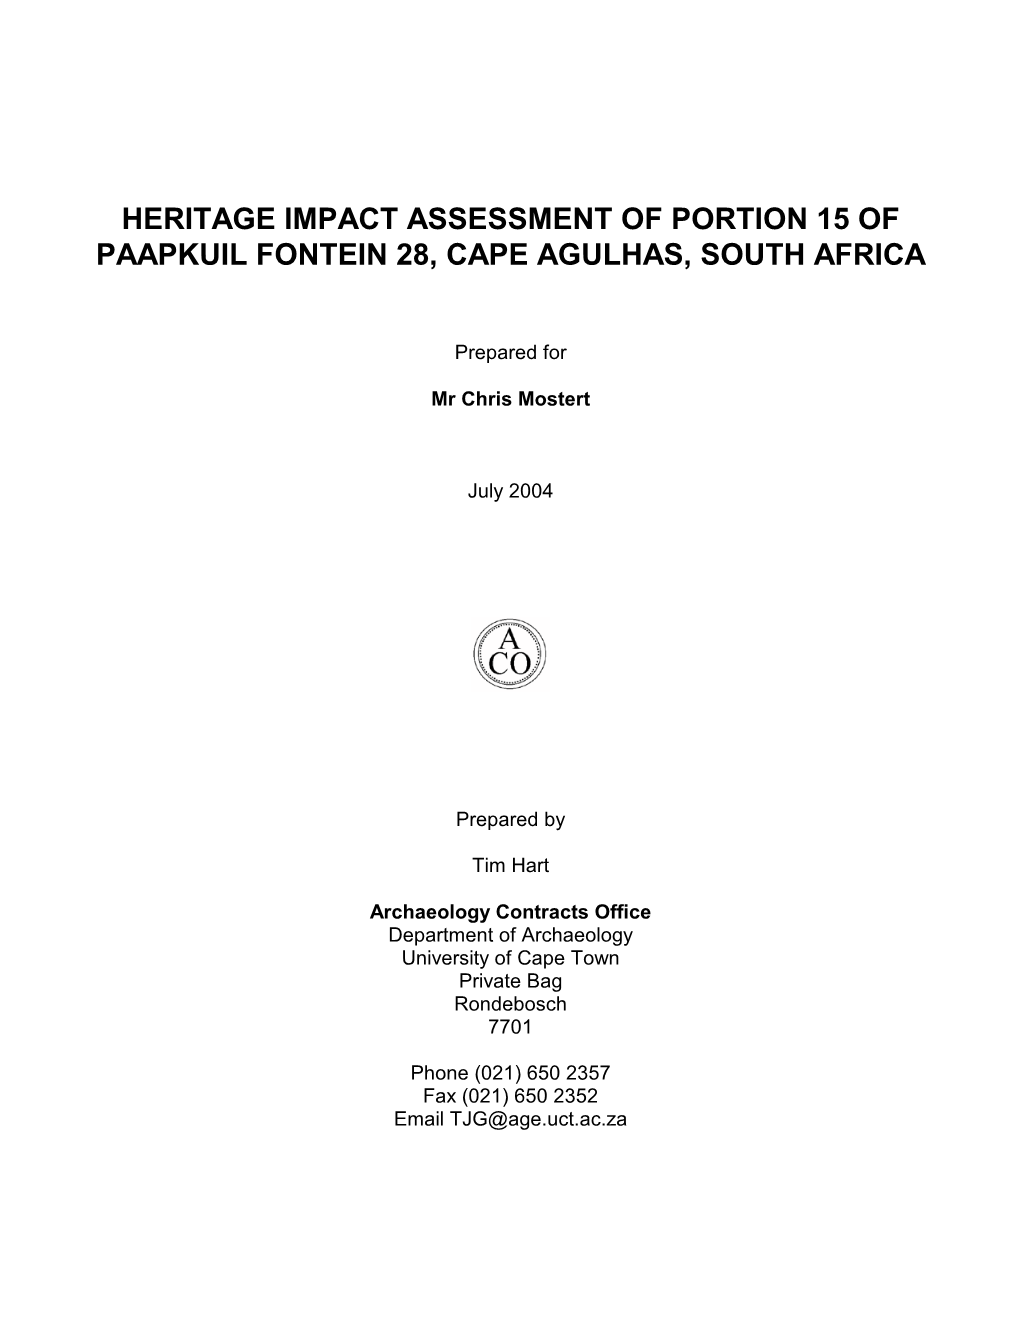 Heritage Impact Assessment of Portion 15 of Paapkuil Fontein 28, Cape Agulhas, South Africa